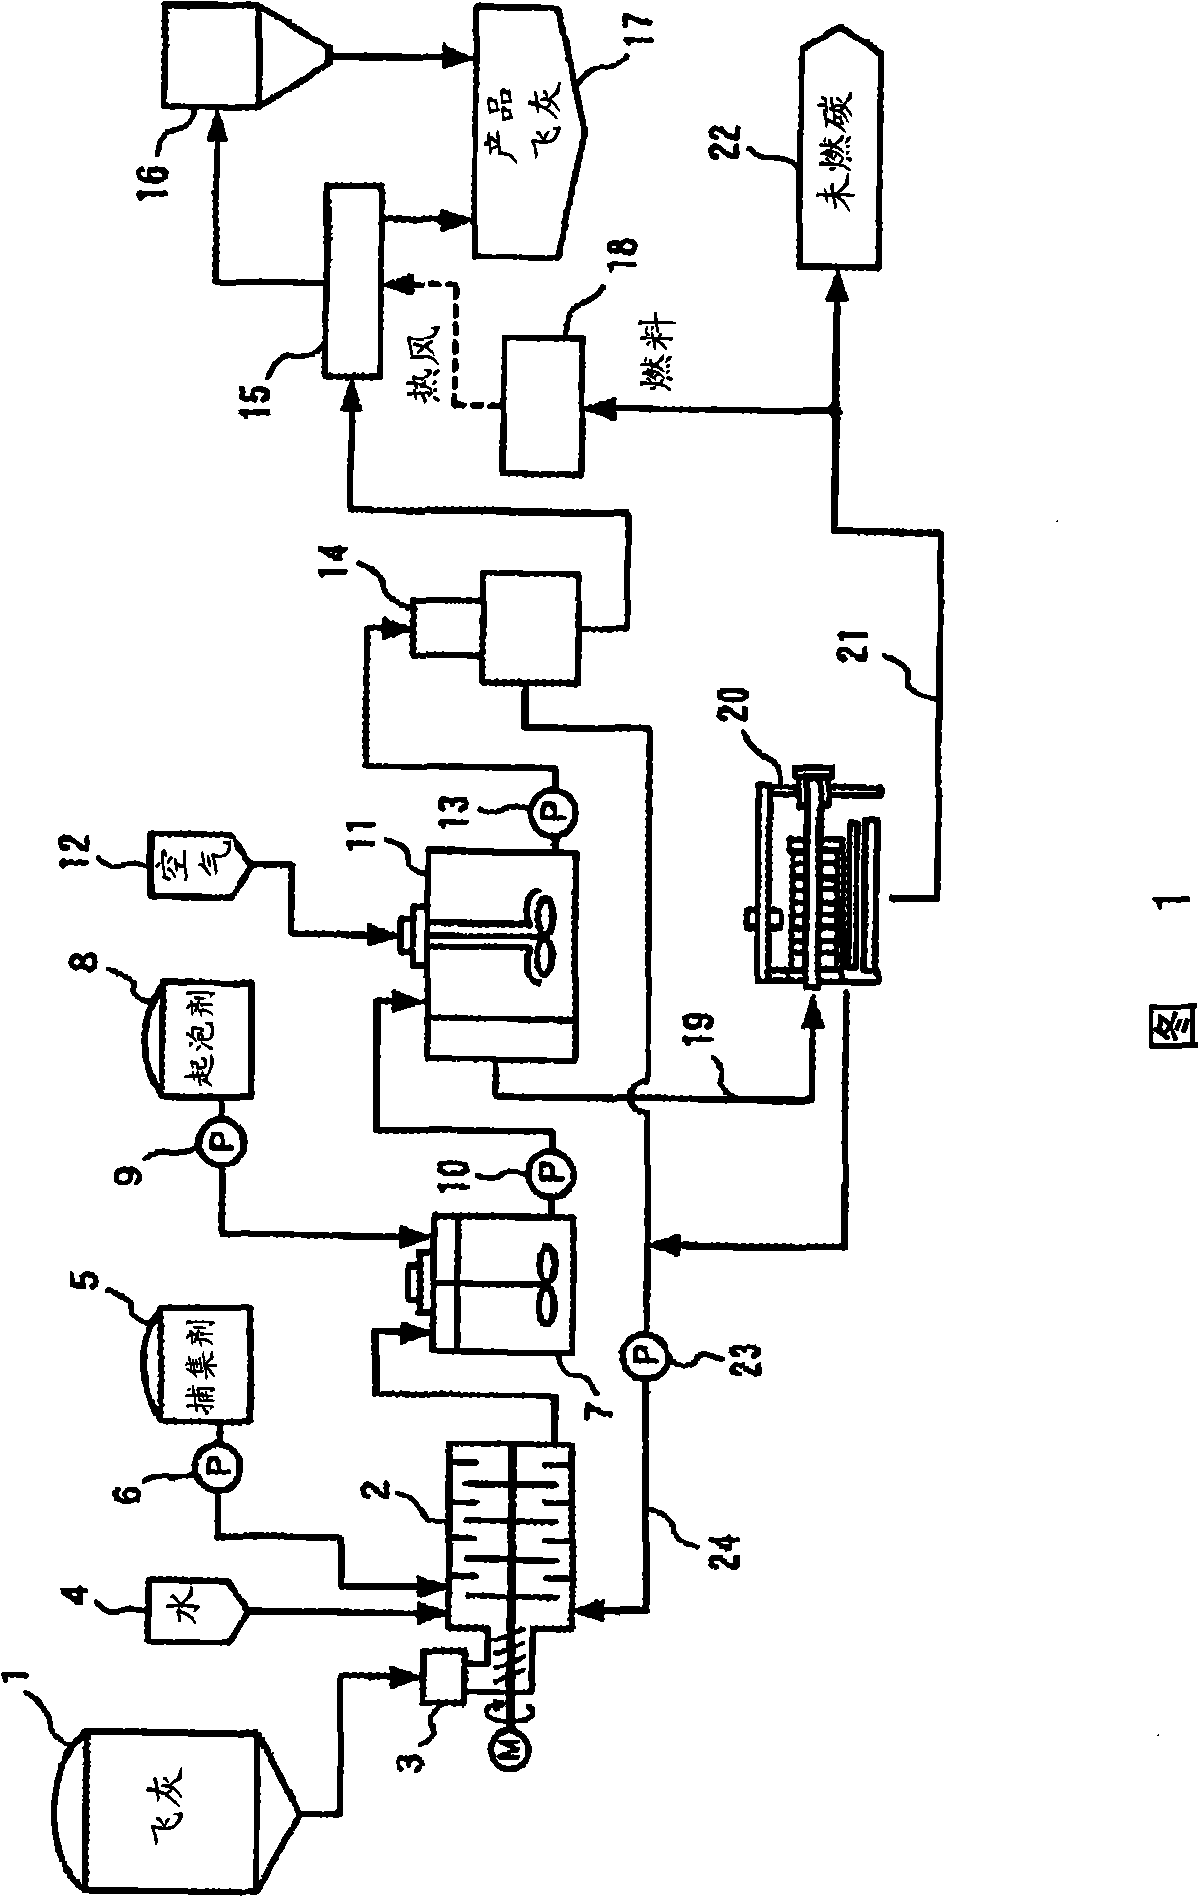 Method for removal of unburned carbon in fly ash